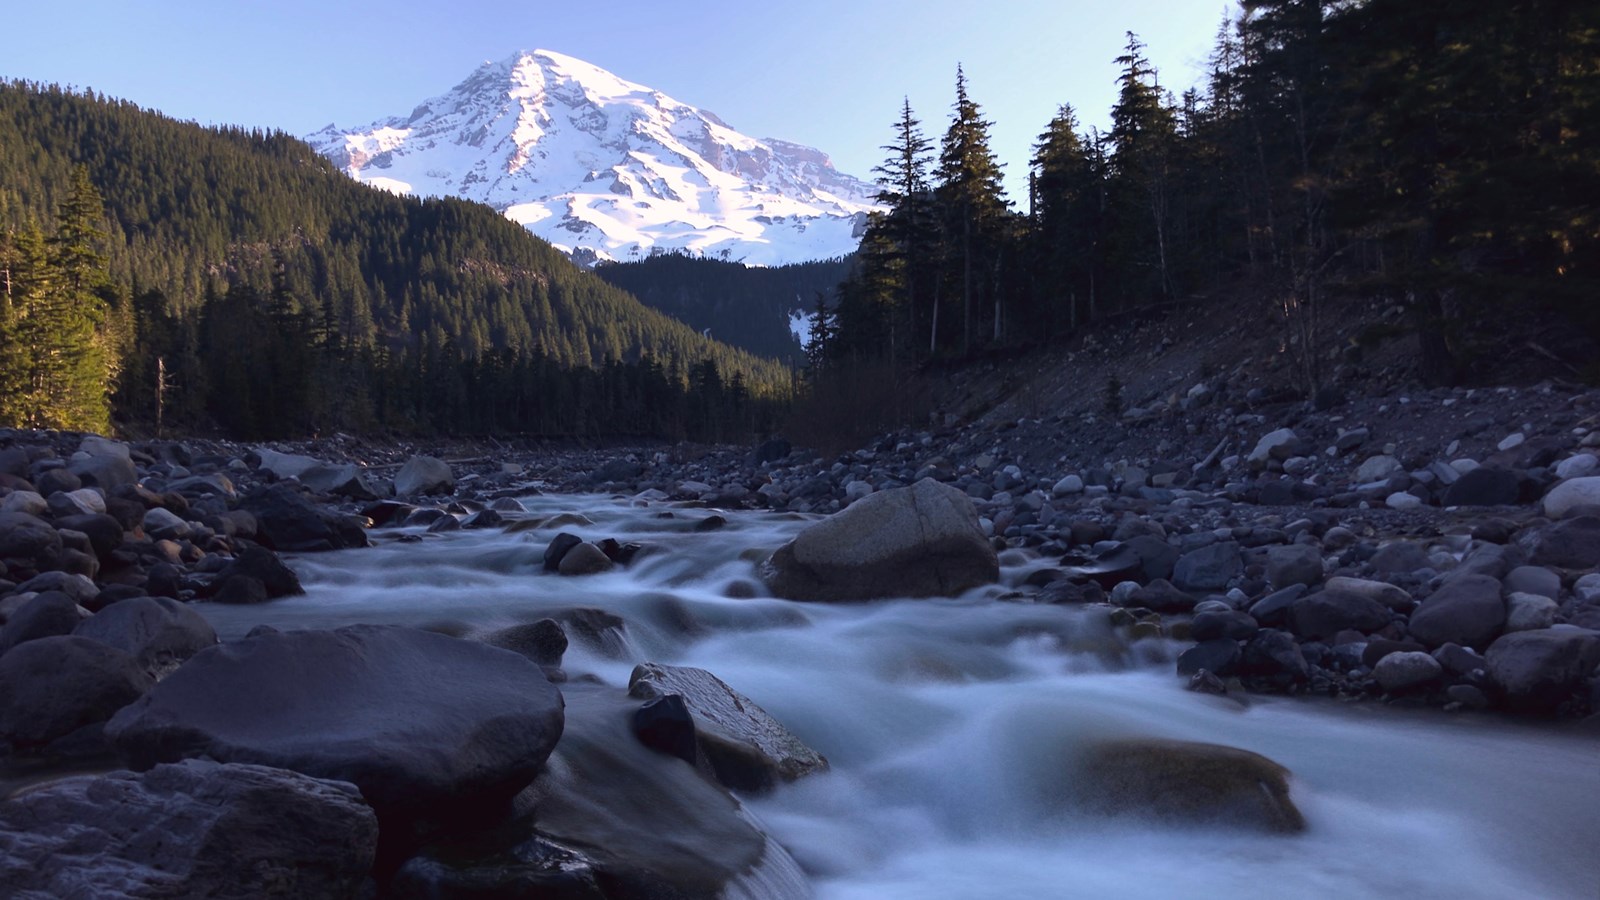 A river flows through a rocky riverbed in a valley on the slopes of a glaciated mountain.